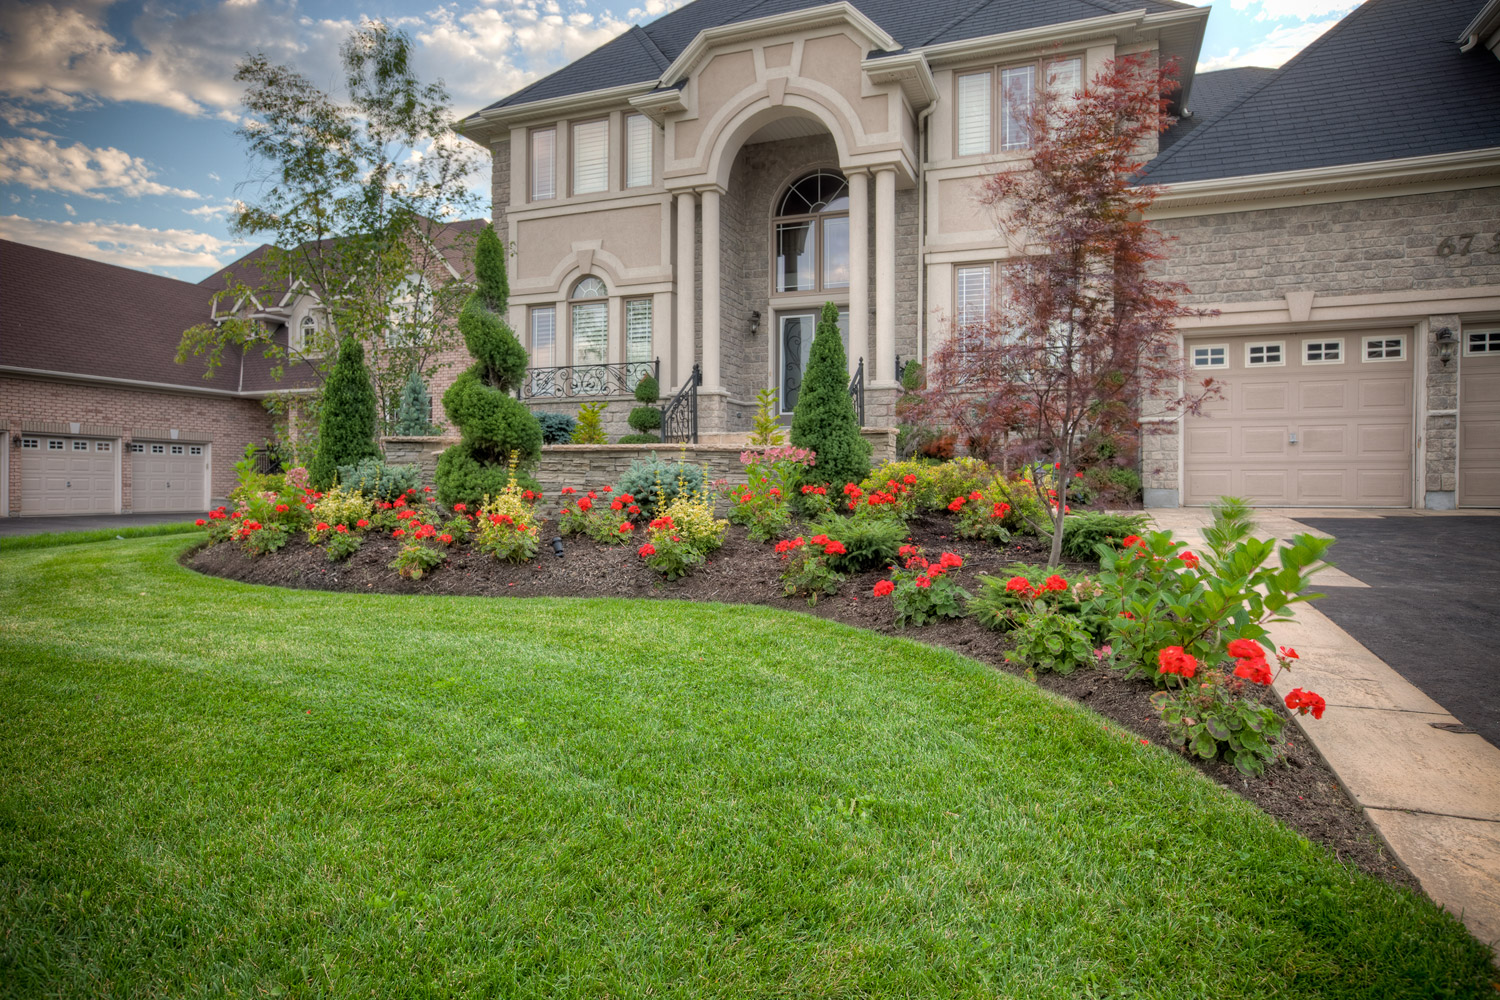  how to landscape front yard